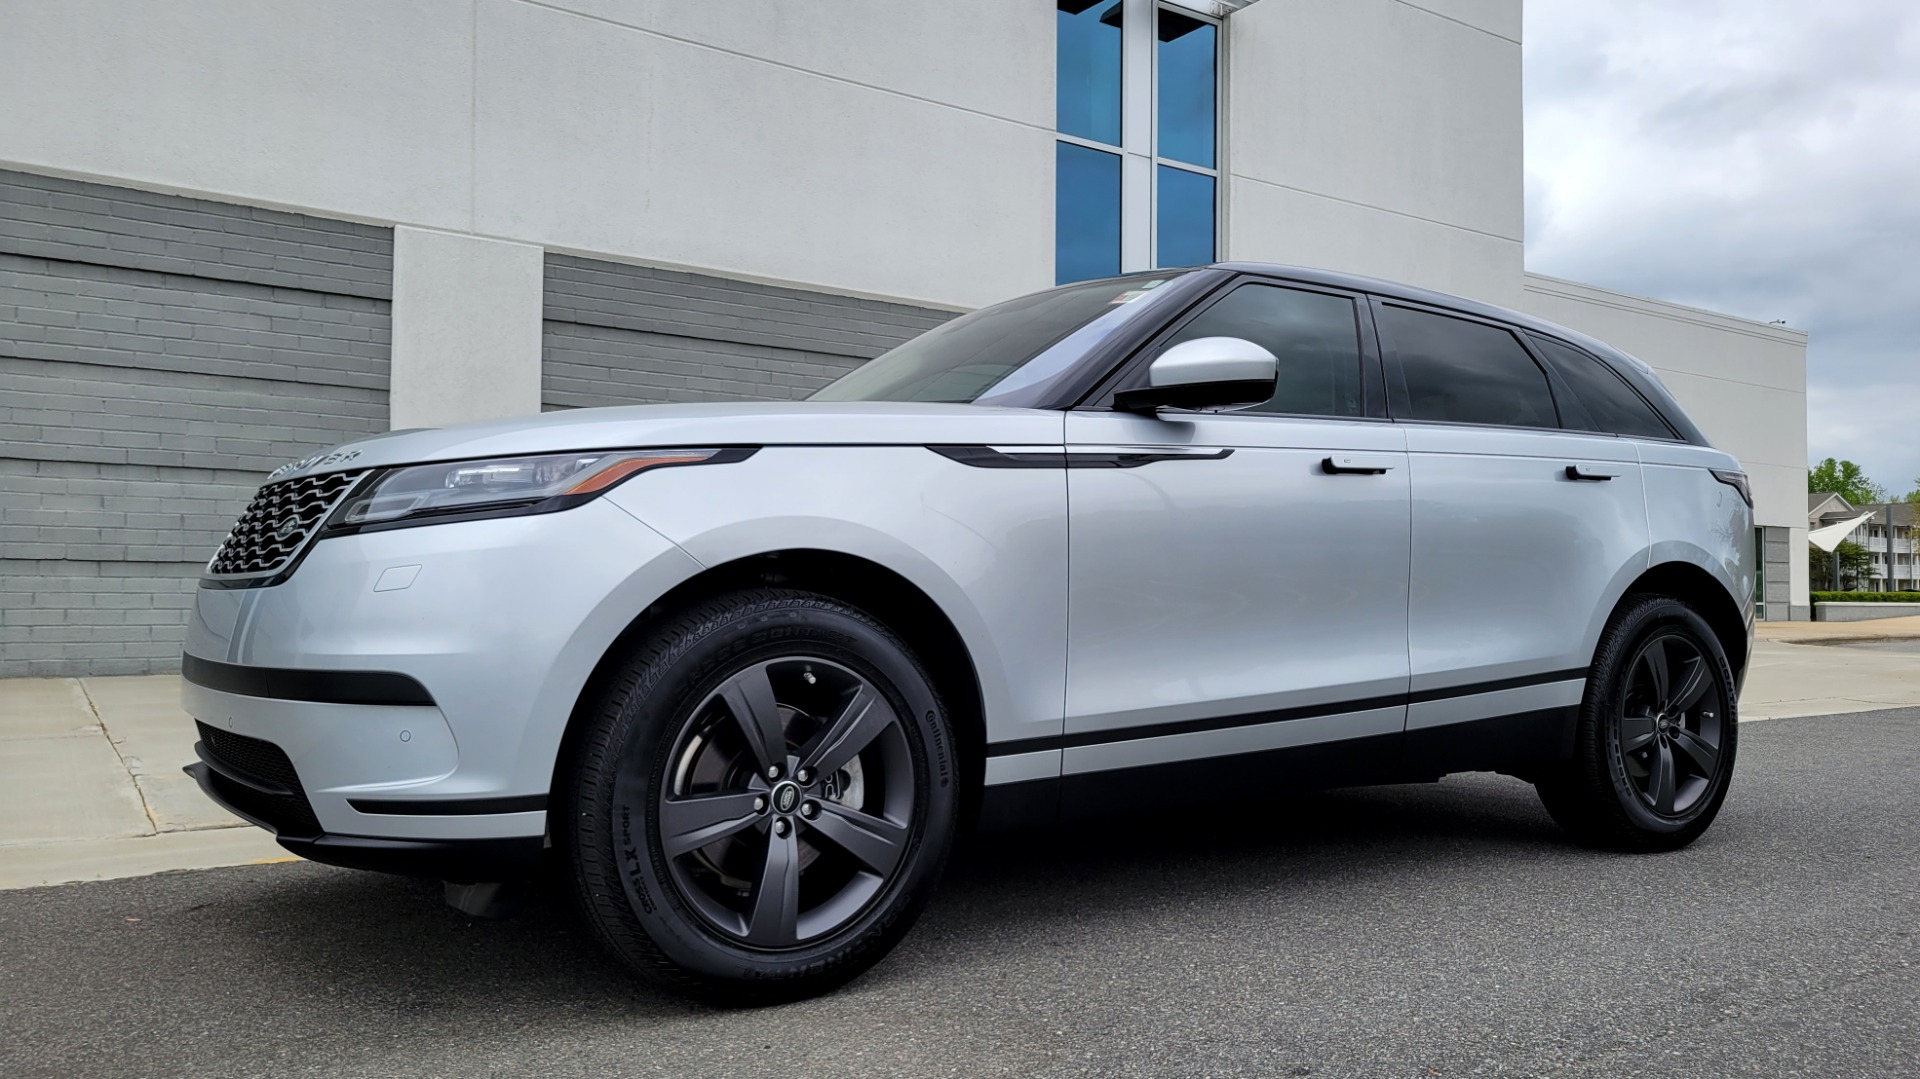 Used 2020 Land Rover RANGE ROVER VELAR S / AWD / 2.0L TURBO / NAV / SUNROOF / 19IN WHLS / REARVIEW for sale $59,995 at Formula Imports in Charlotte NC 28227 3